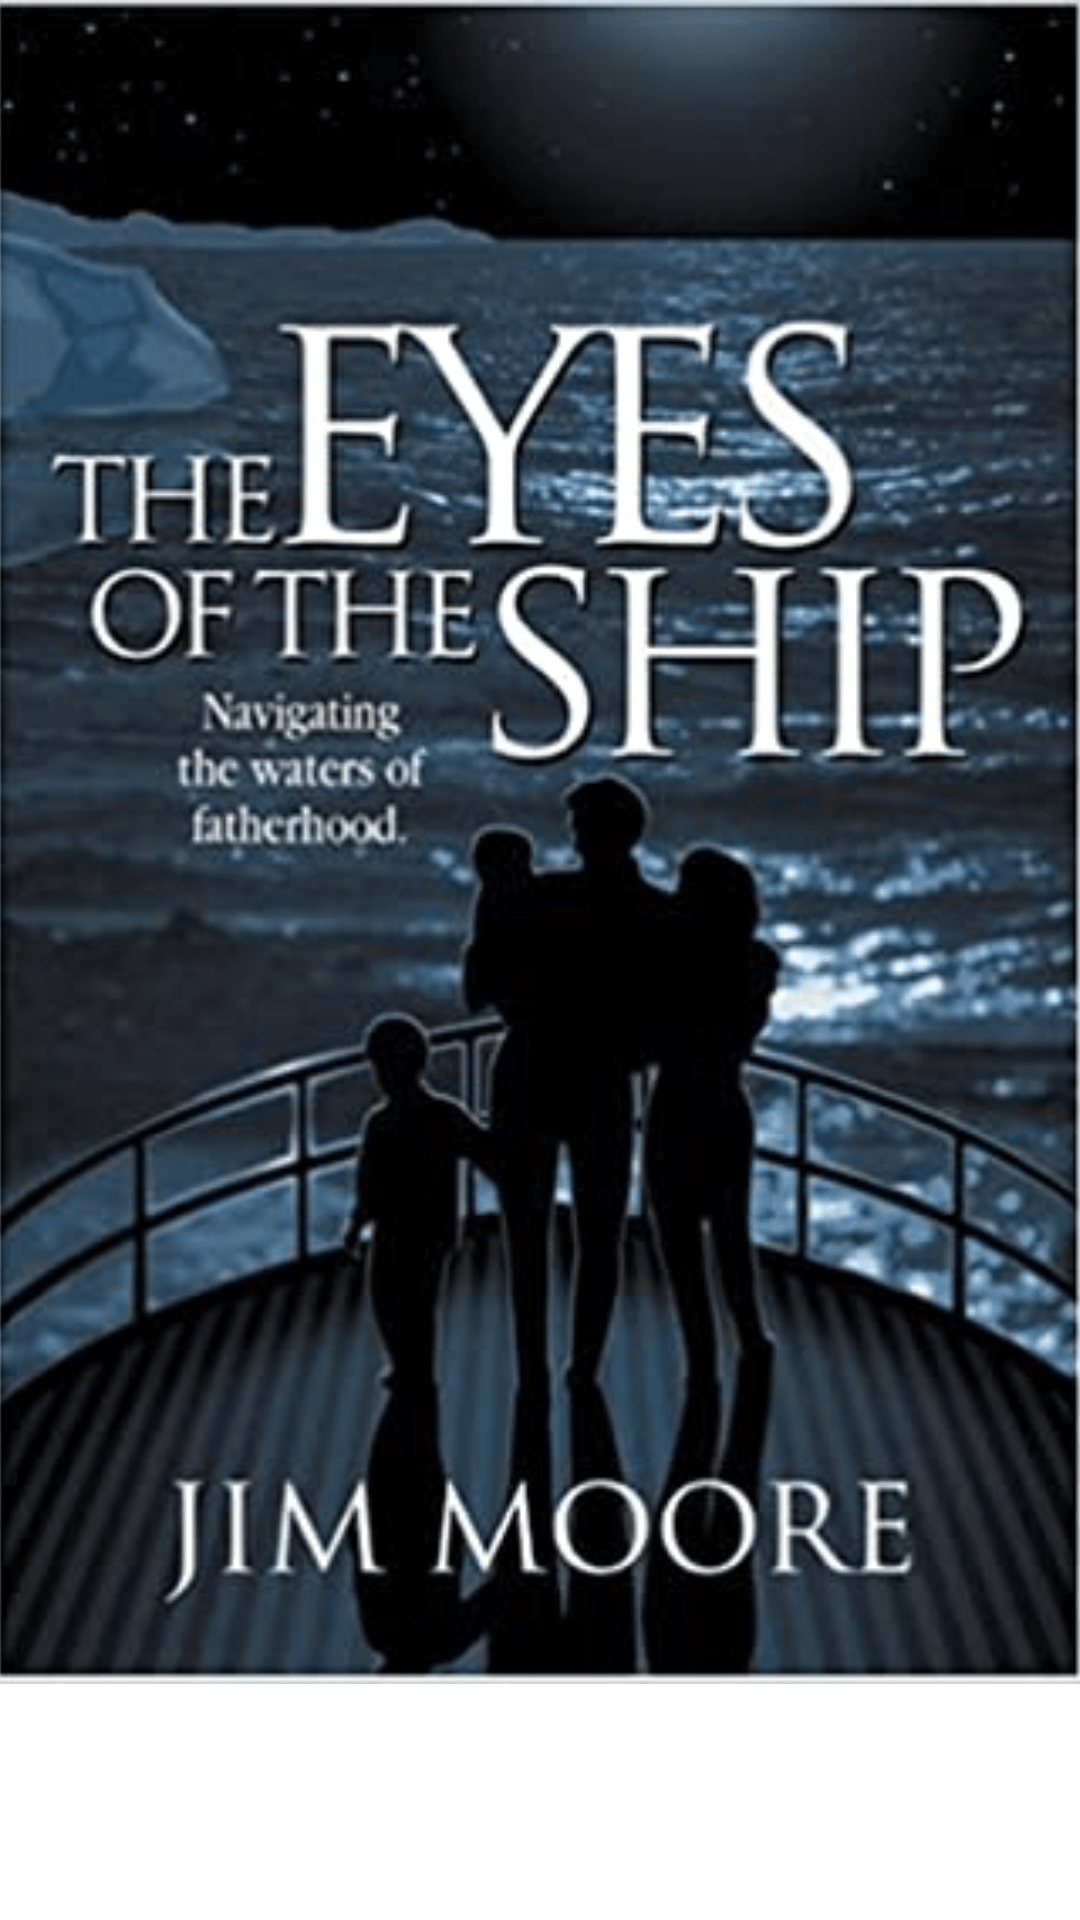 The Eyes of the Ship by Jim Moore